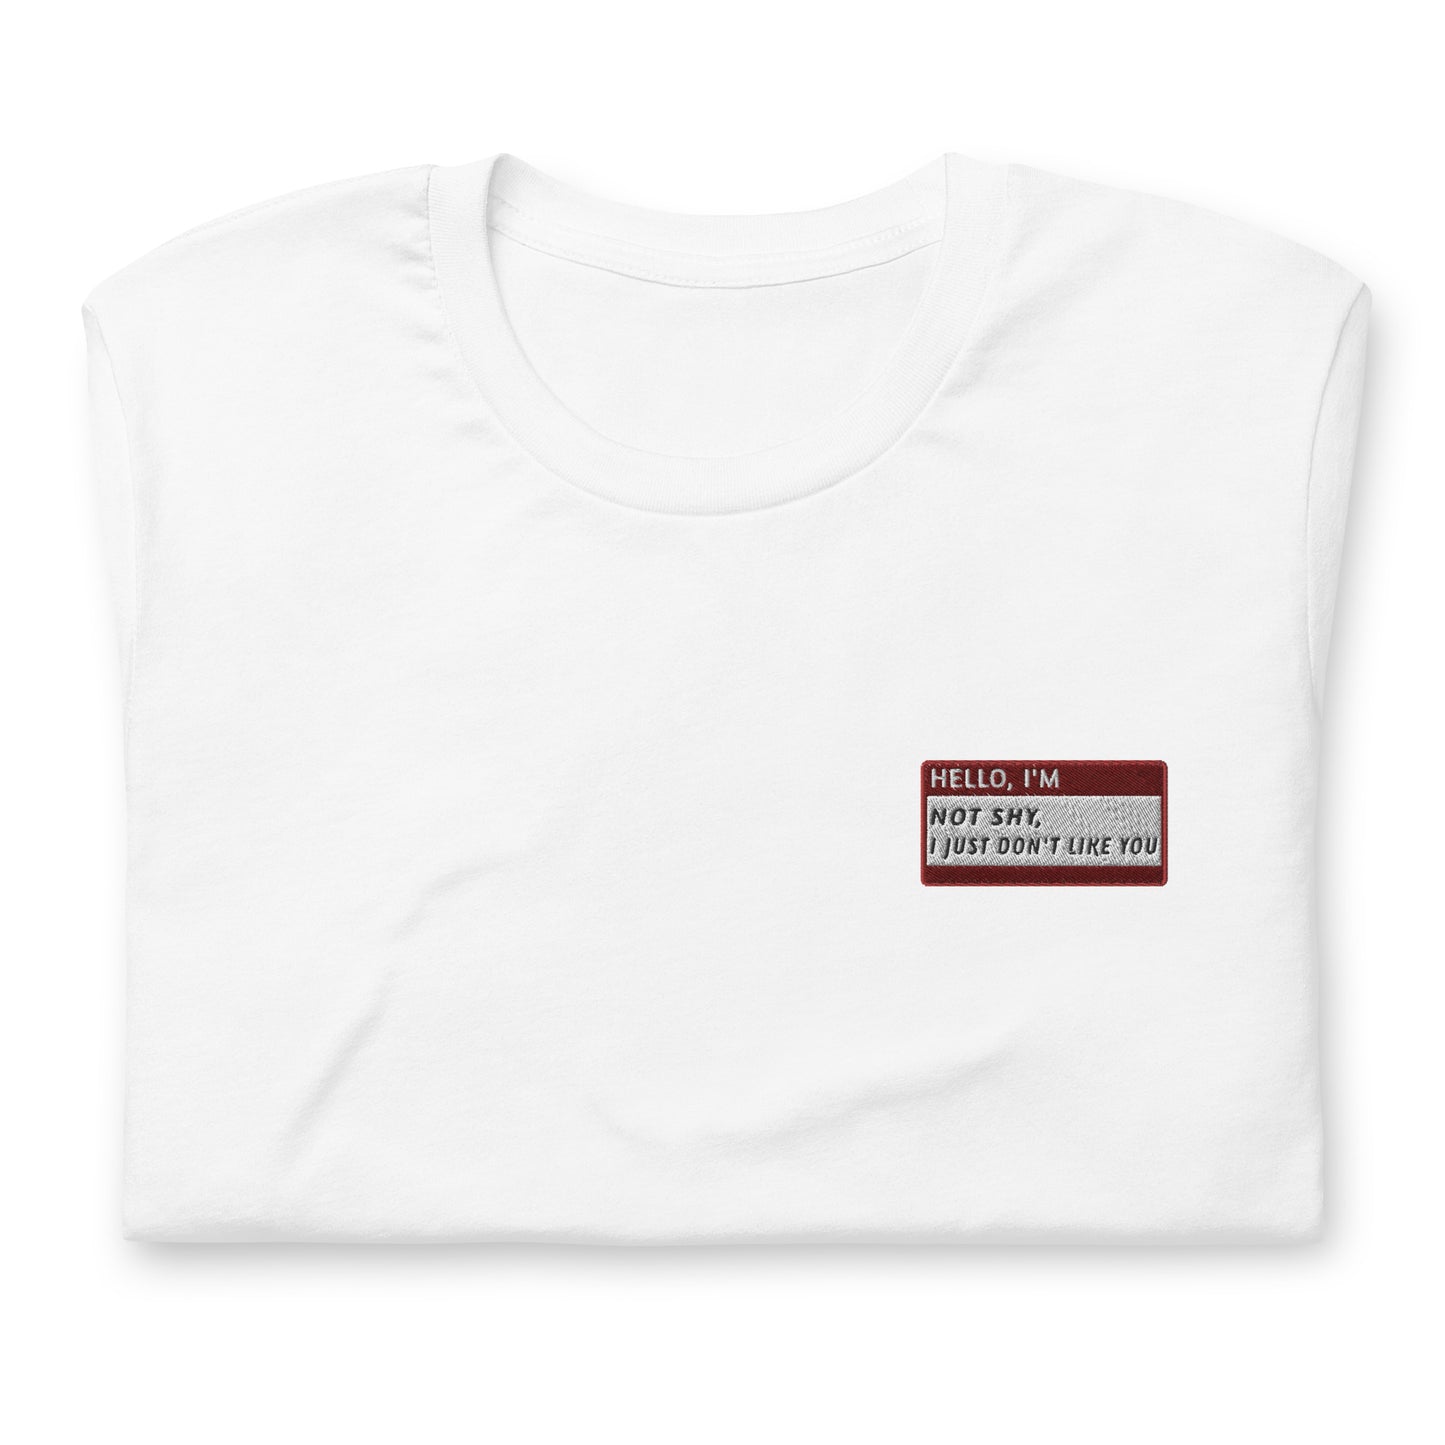 HELLO I'M NOT SHY, I JUST DON'T LIKE YOU - Name Tag T-Shirt